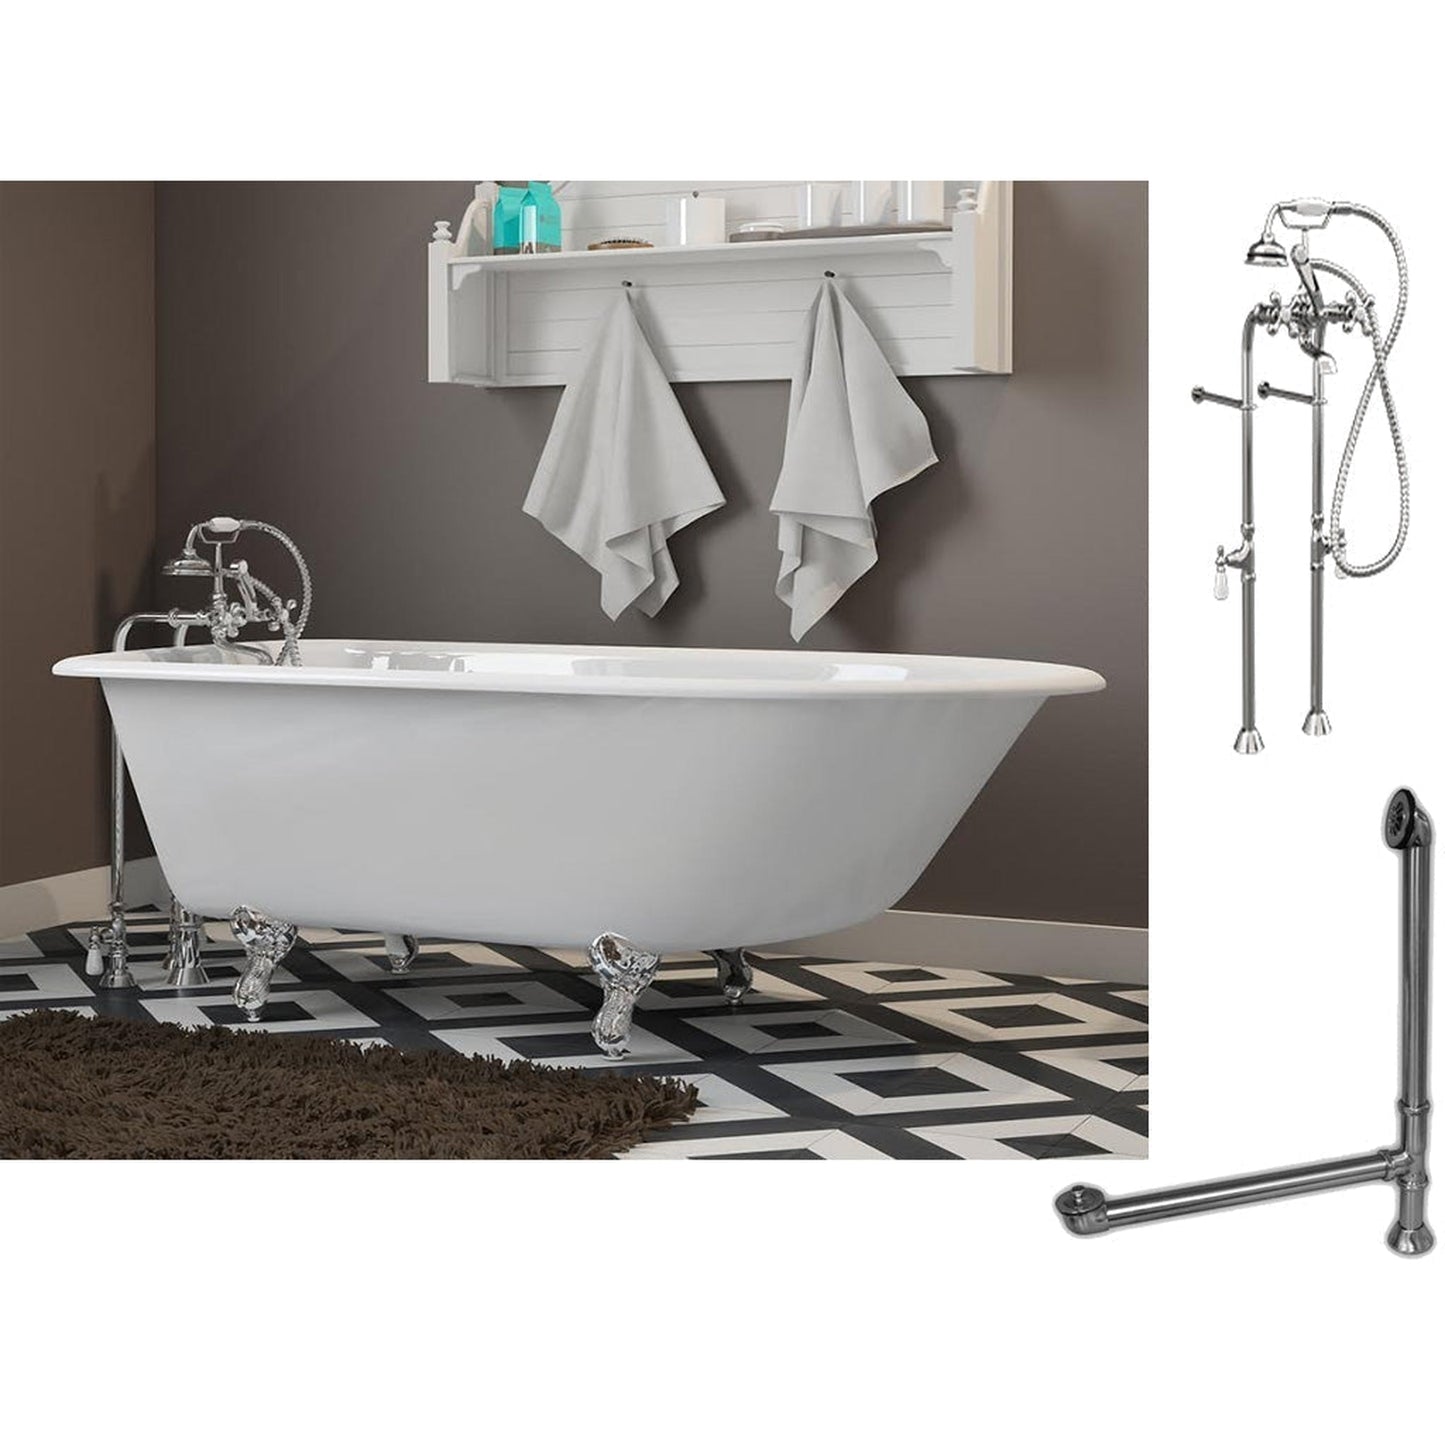 Cambridge Plumbing 54" White Cast Iron Rolled Rim Clawfoot Bathtub With No Deck Holes And Complete Plumbing Package Including Floor Mounted British Telephone Faucet, Drain And Overflow Assembly In Polished Chrome